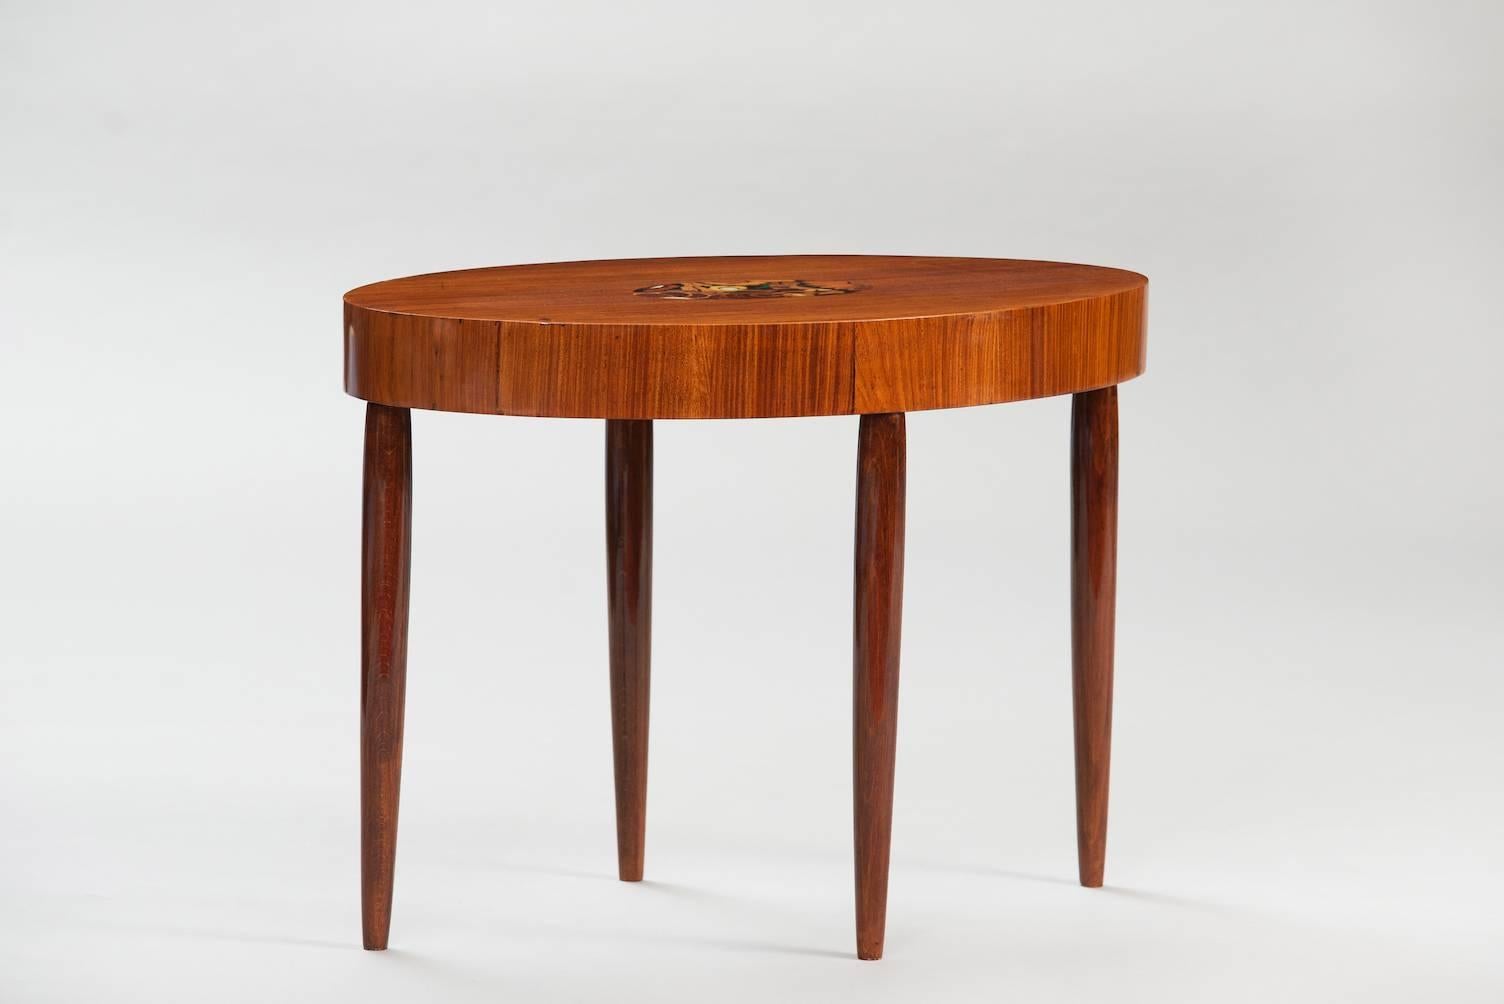 Rosewood oval side table with exotic woods and mother-of-pearl inlaid, in the style of Louis Majorelle.